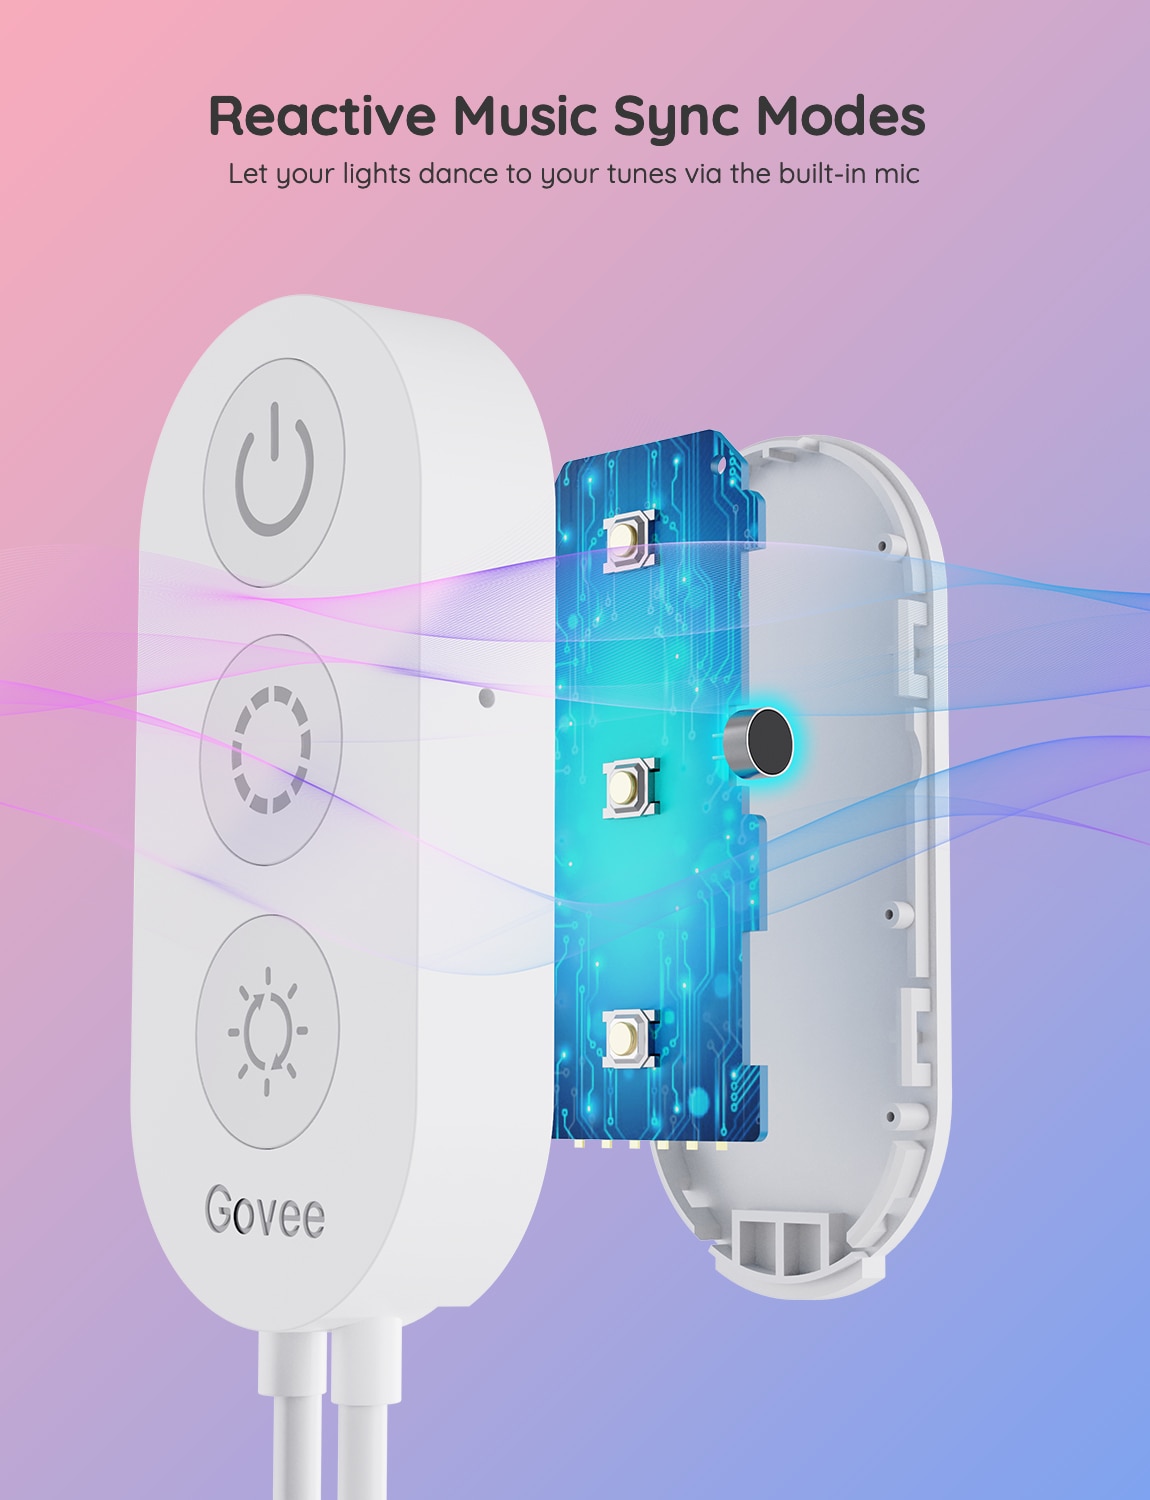 Govee Home 5.9.10 Free Download